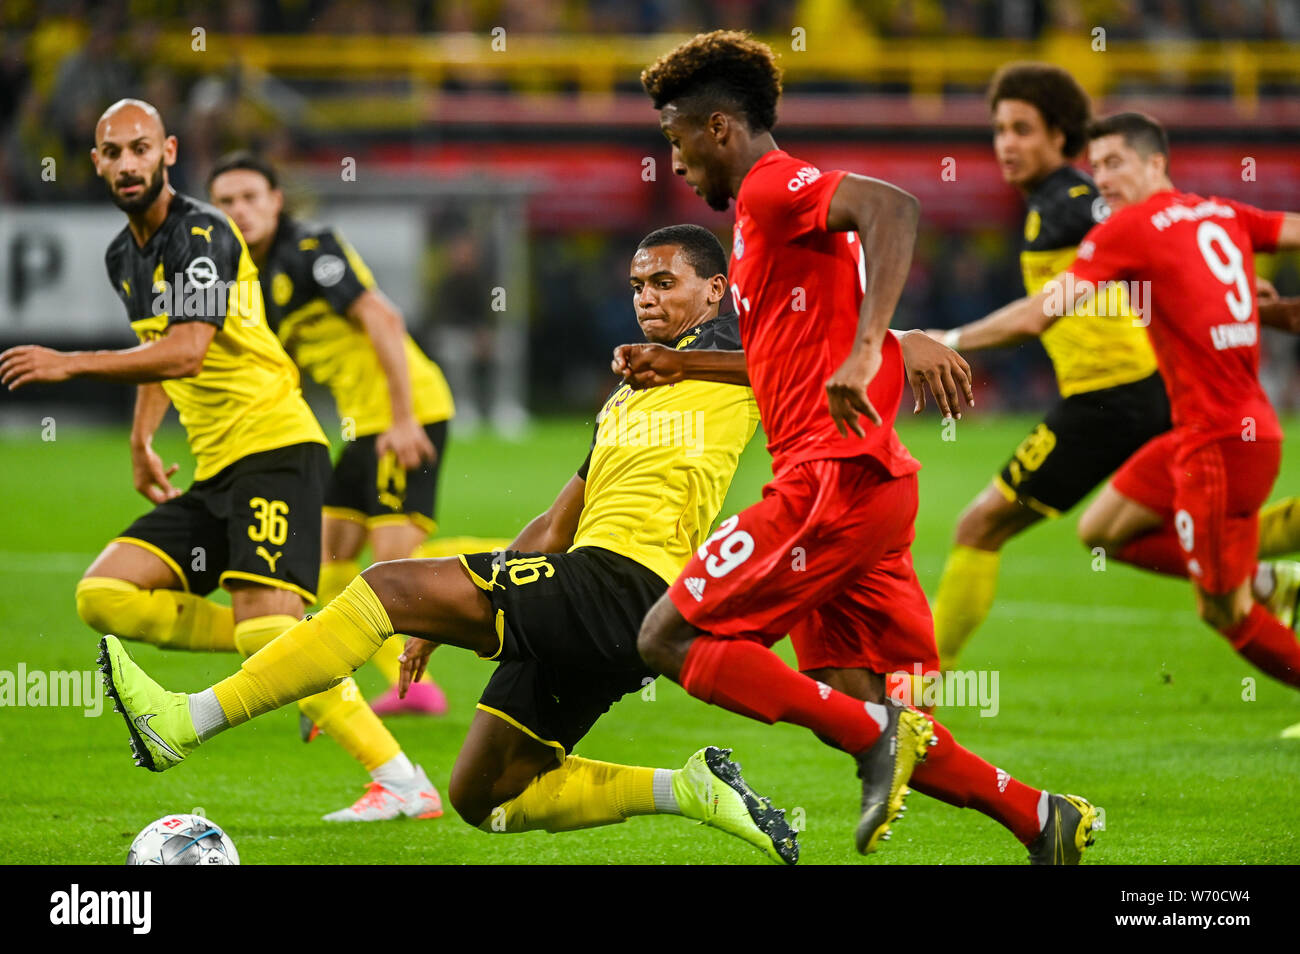 Manuel Akanji from Borussia Dortmund (L) and Kingsley Coman from Bayern Munich (R) are seen in action during the Germany Supercup Final 2019 match between Borussia Dortmund and Bayern Munich.(Final score: Borussia Dortmund 2:0 Bayern Munich) Stock Photo